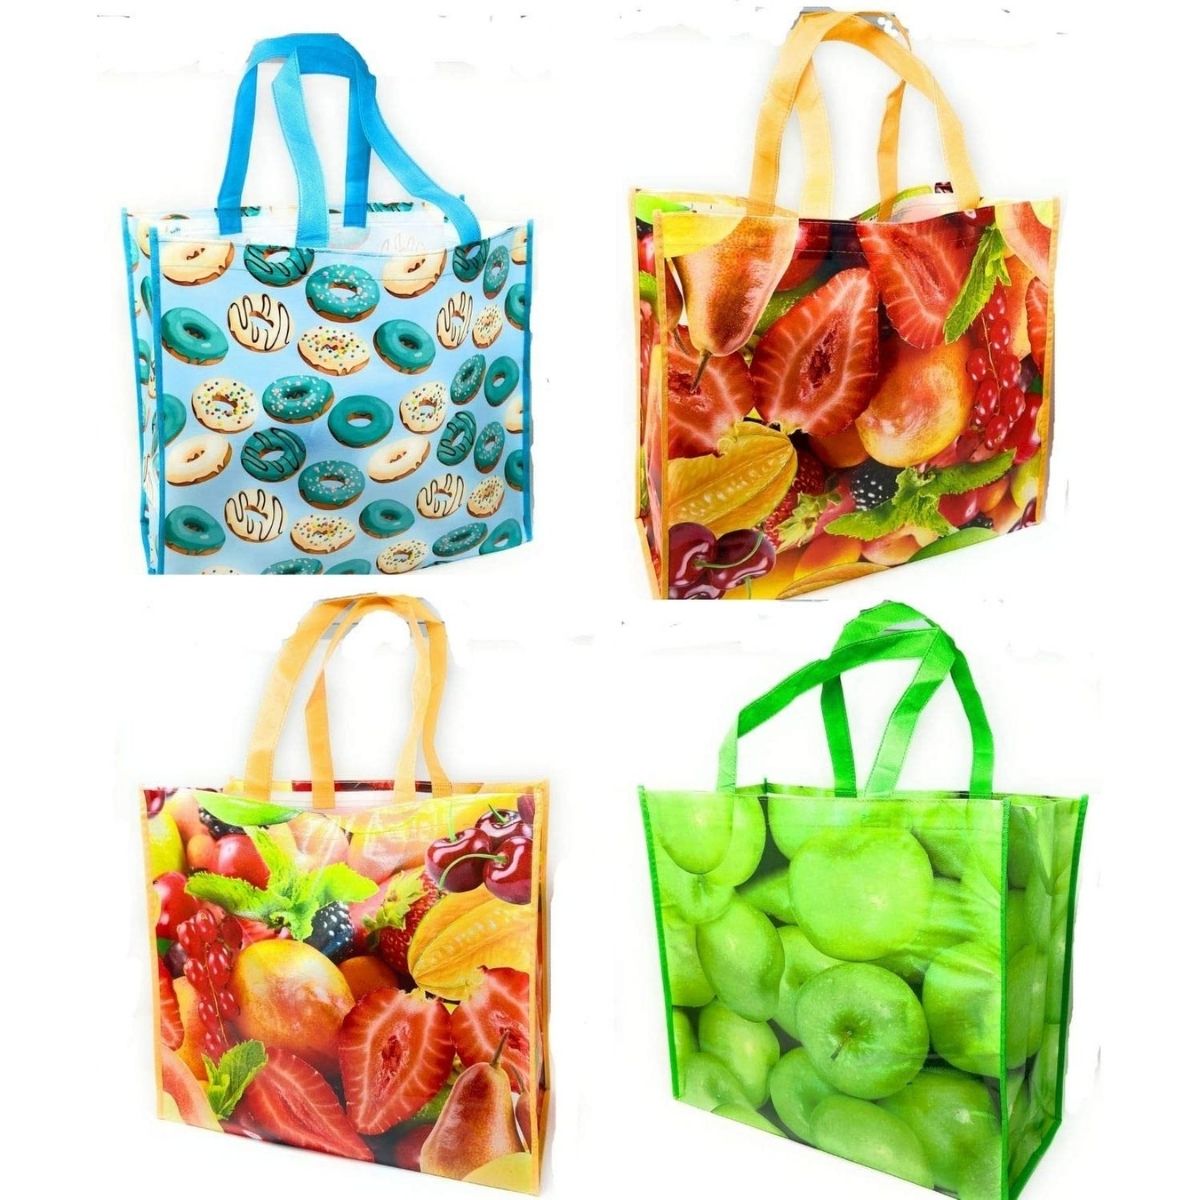 These Stylish Totes Are Great Alternatives To Disposable Plastic